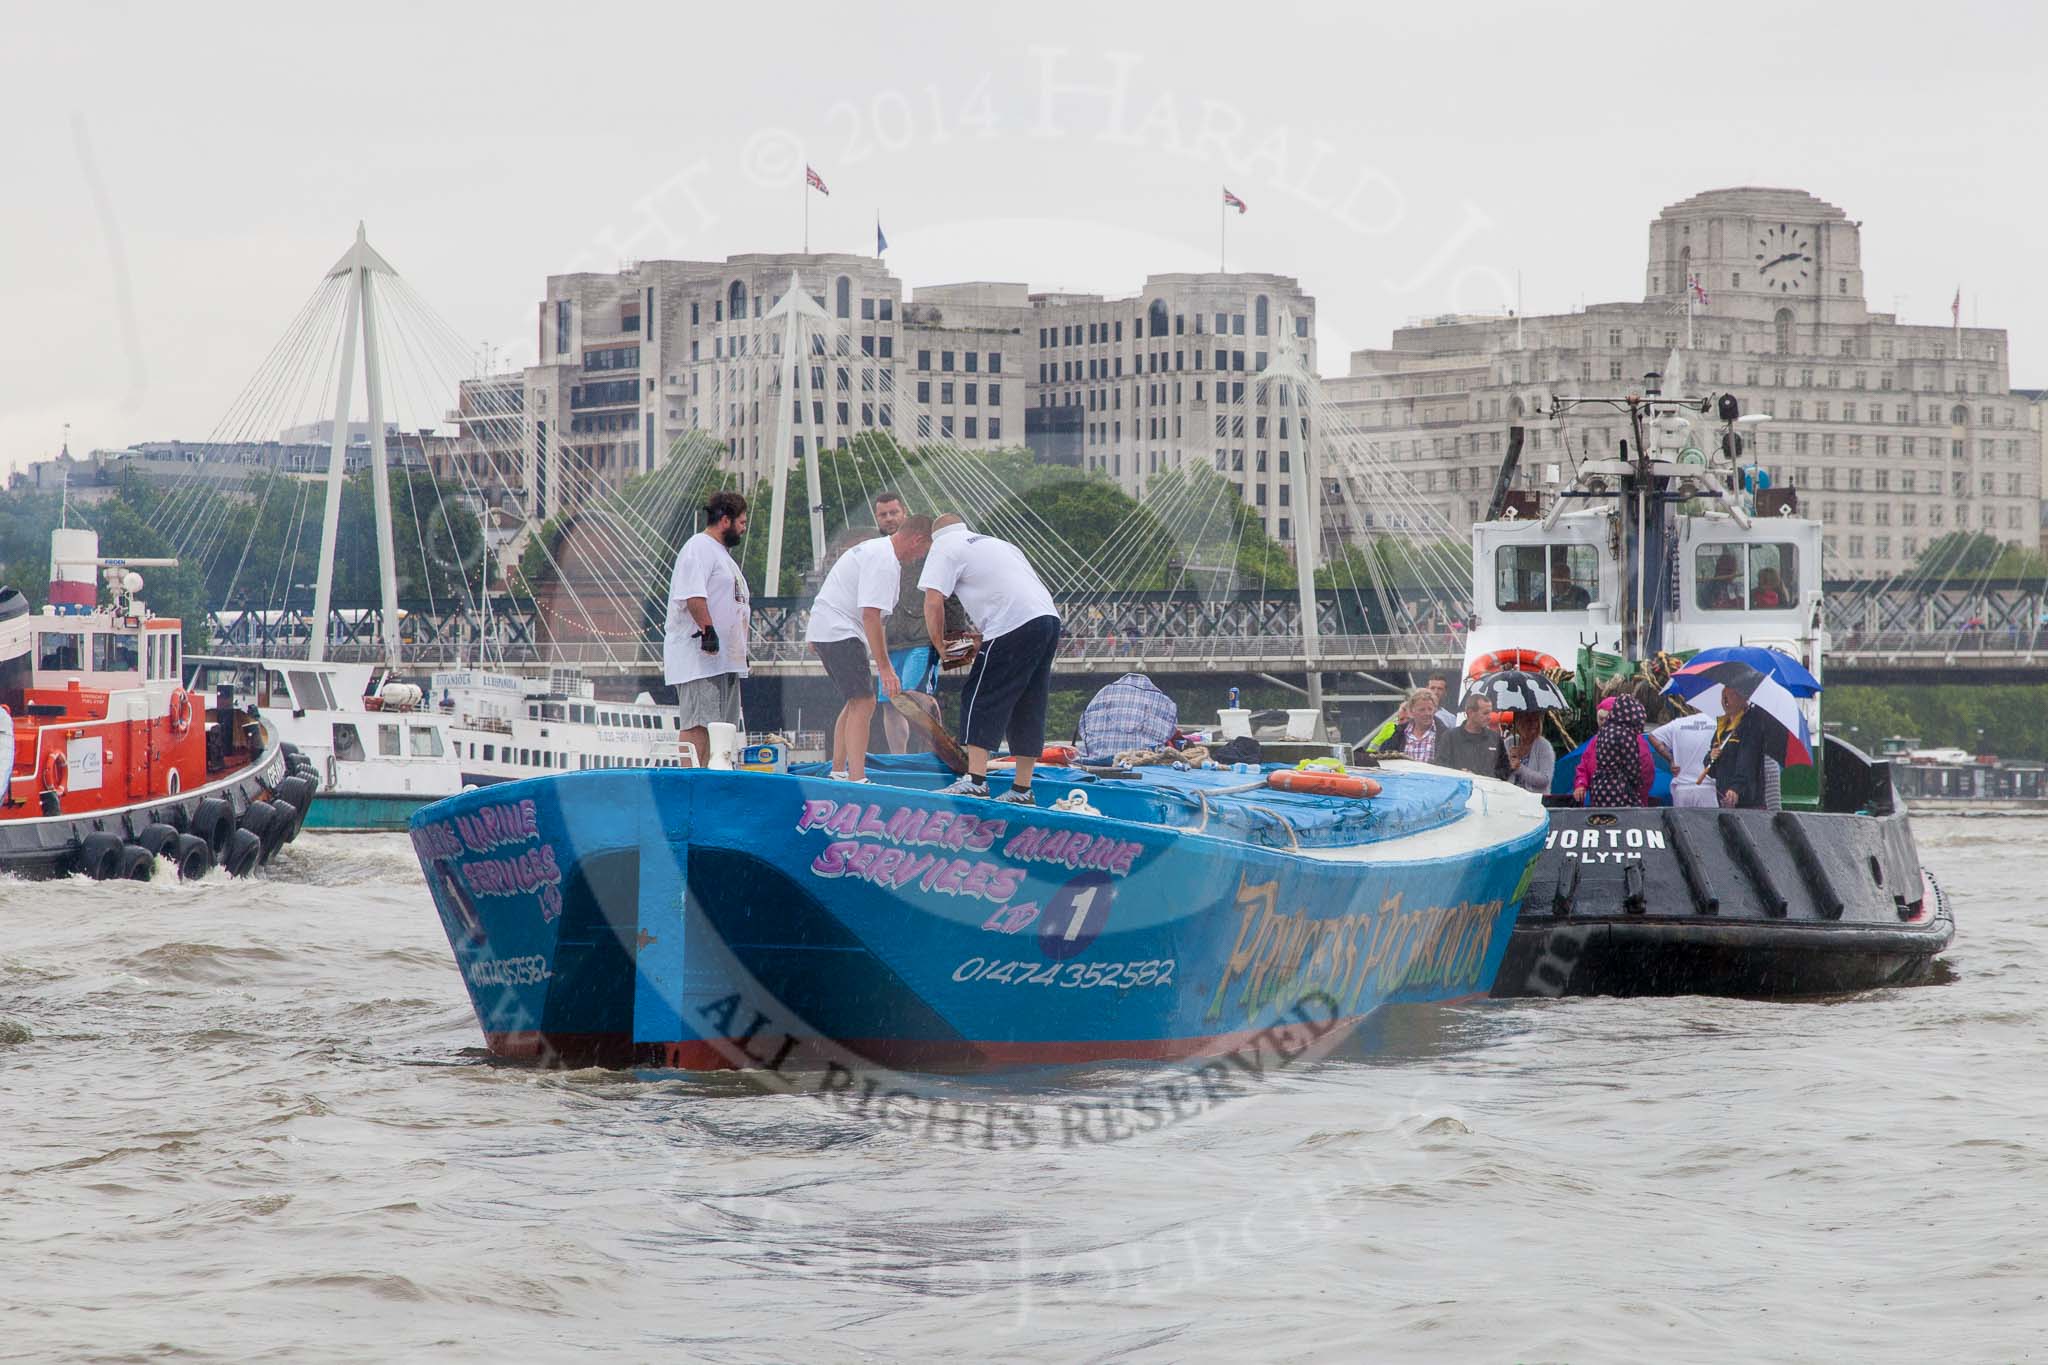 TOW River Thames Barge Driving Race 2014.
River Thames between Greenwich and Westminster,
London,

United Kingdom,
on 28 June 2014 at 14:42, image #443